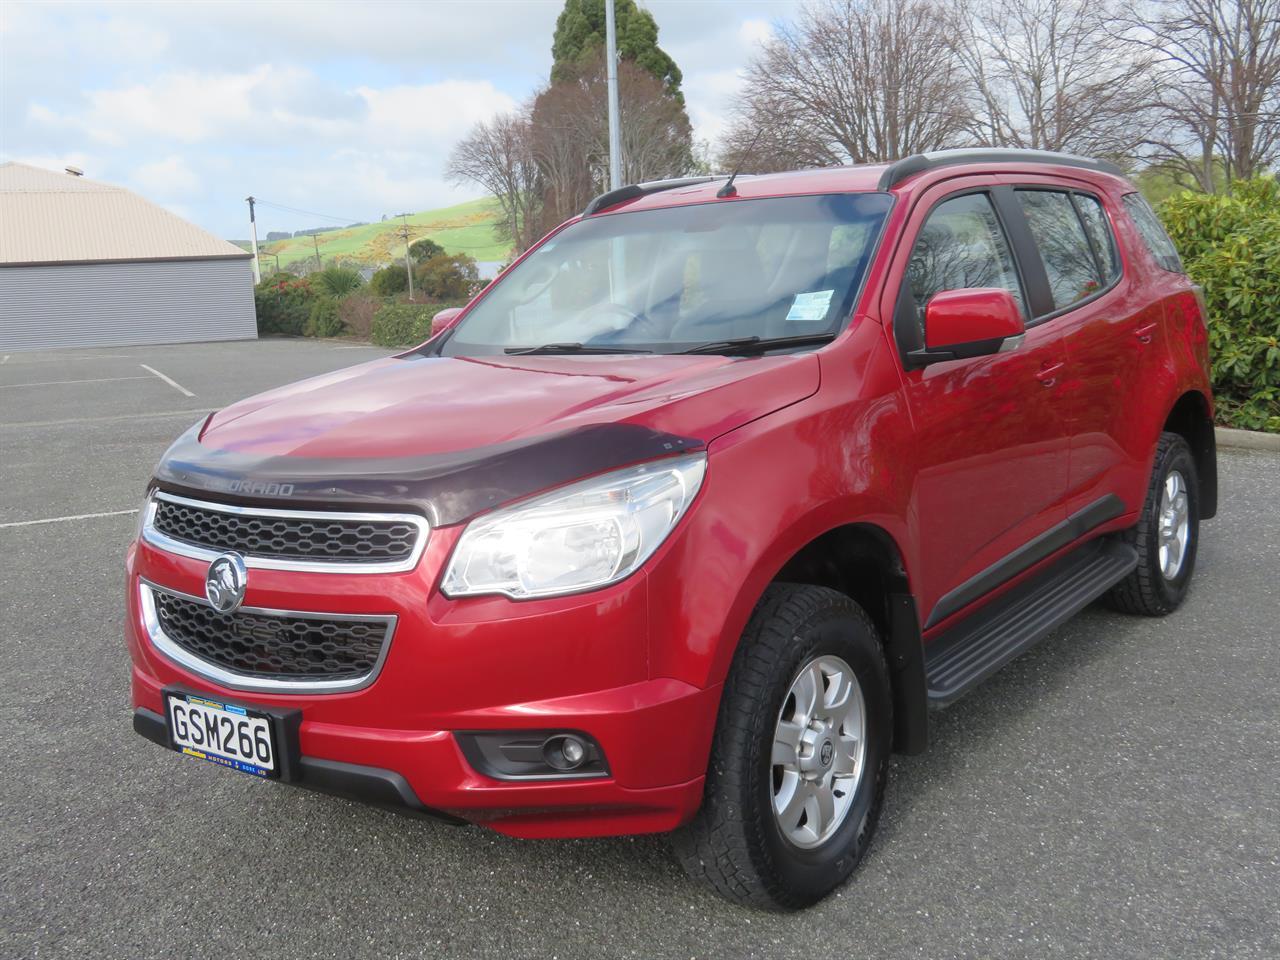 image-6, 2013 Holden Colorado 7 LT 4x4 7 Seater at Gore